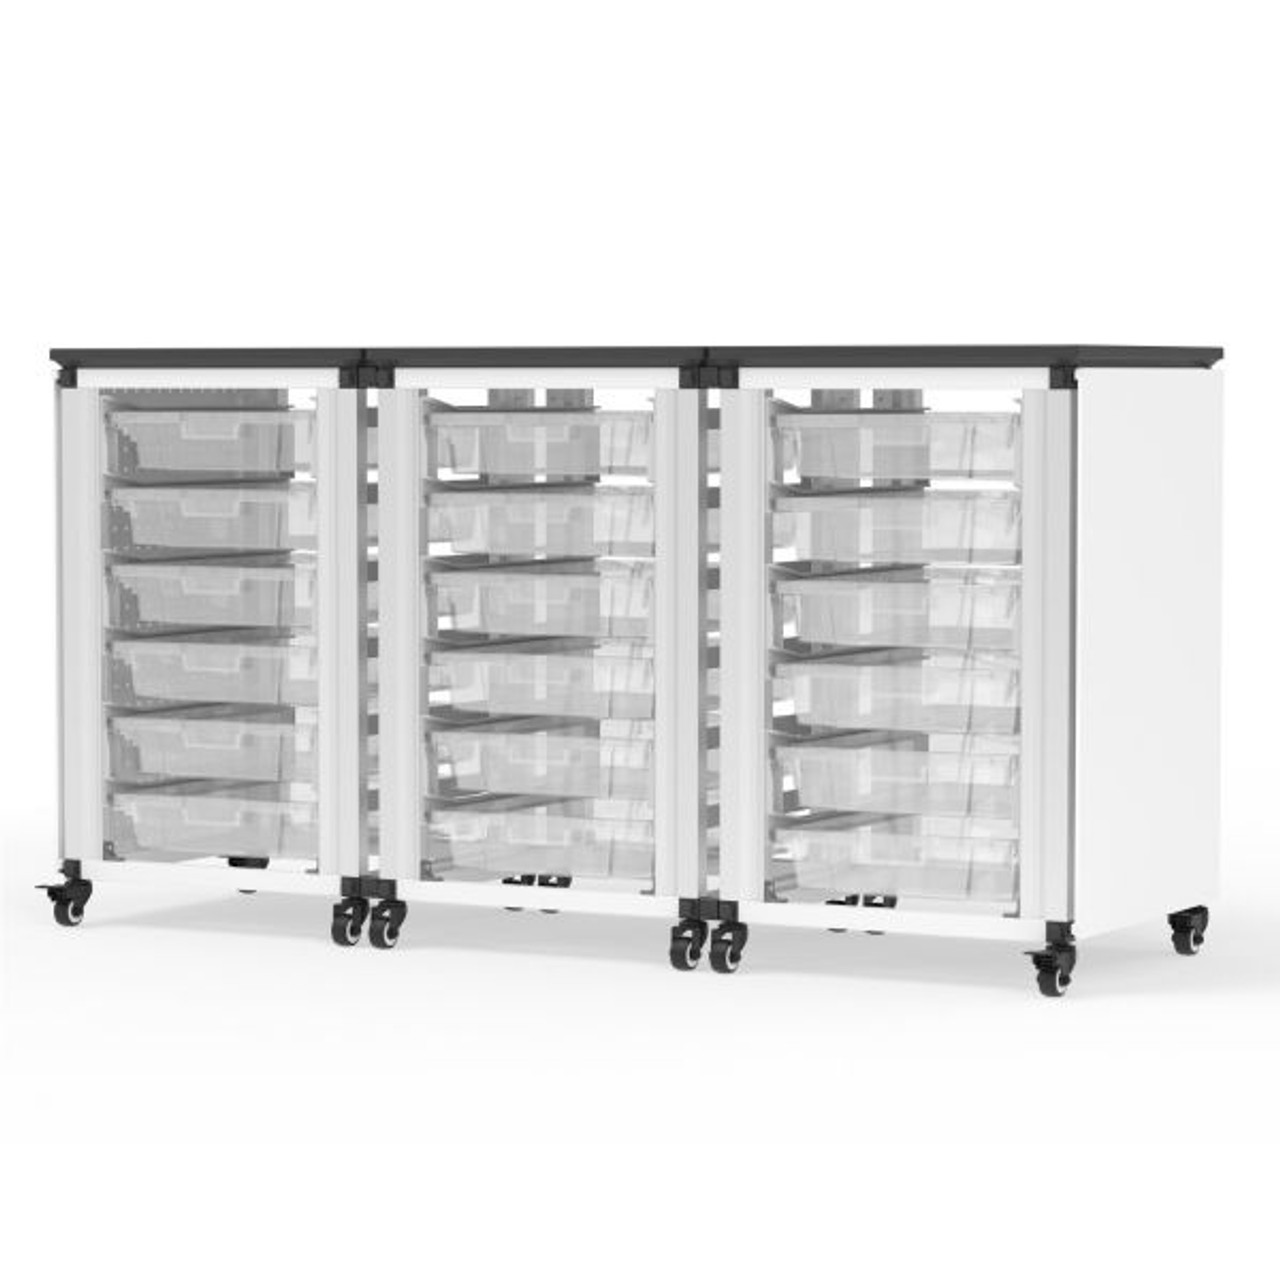 Modular Classroom Storage Cabinet Three Side by Side Modules with 18 ...